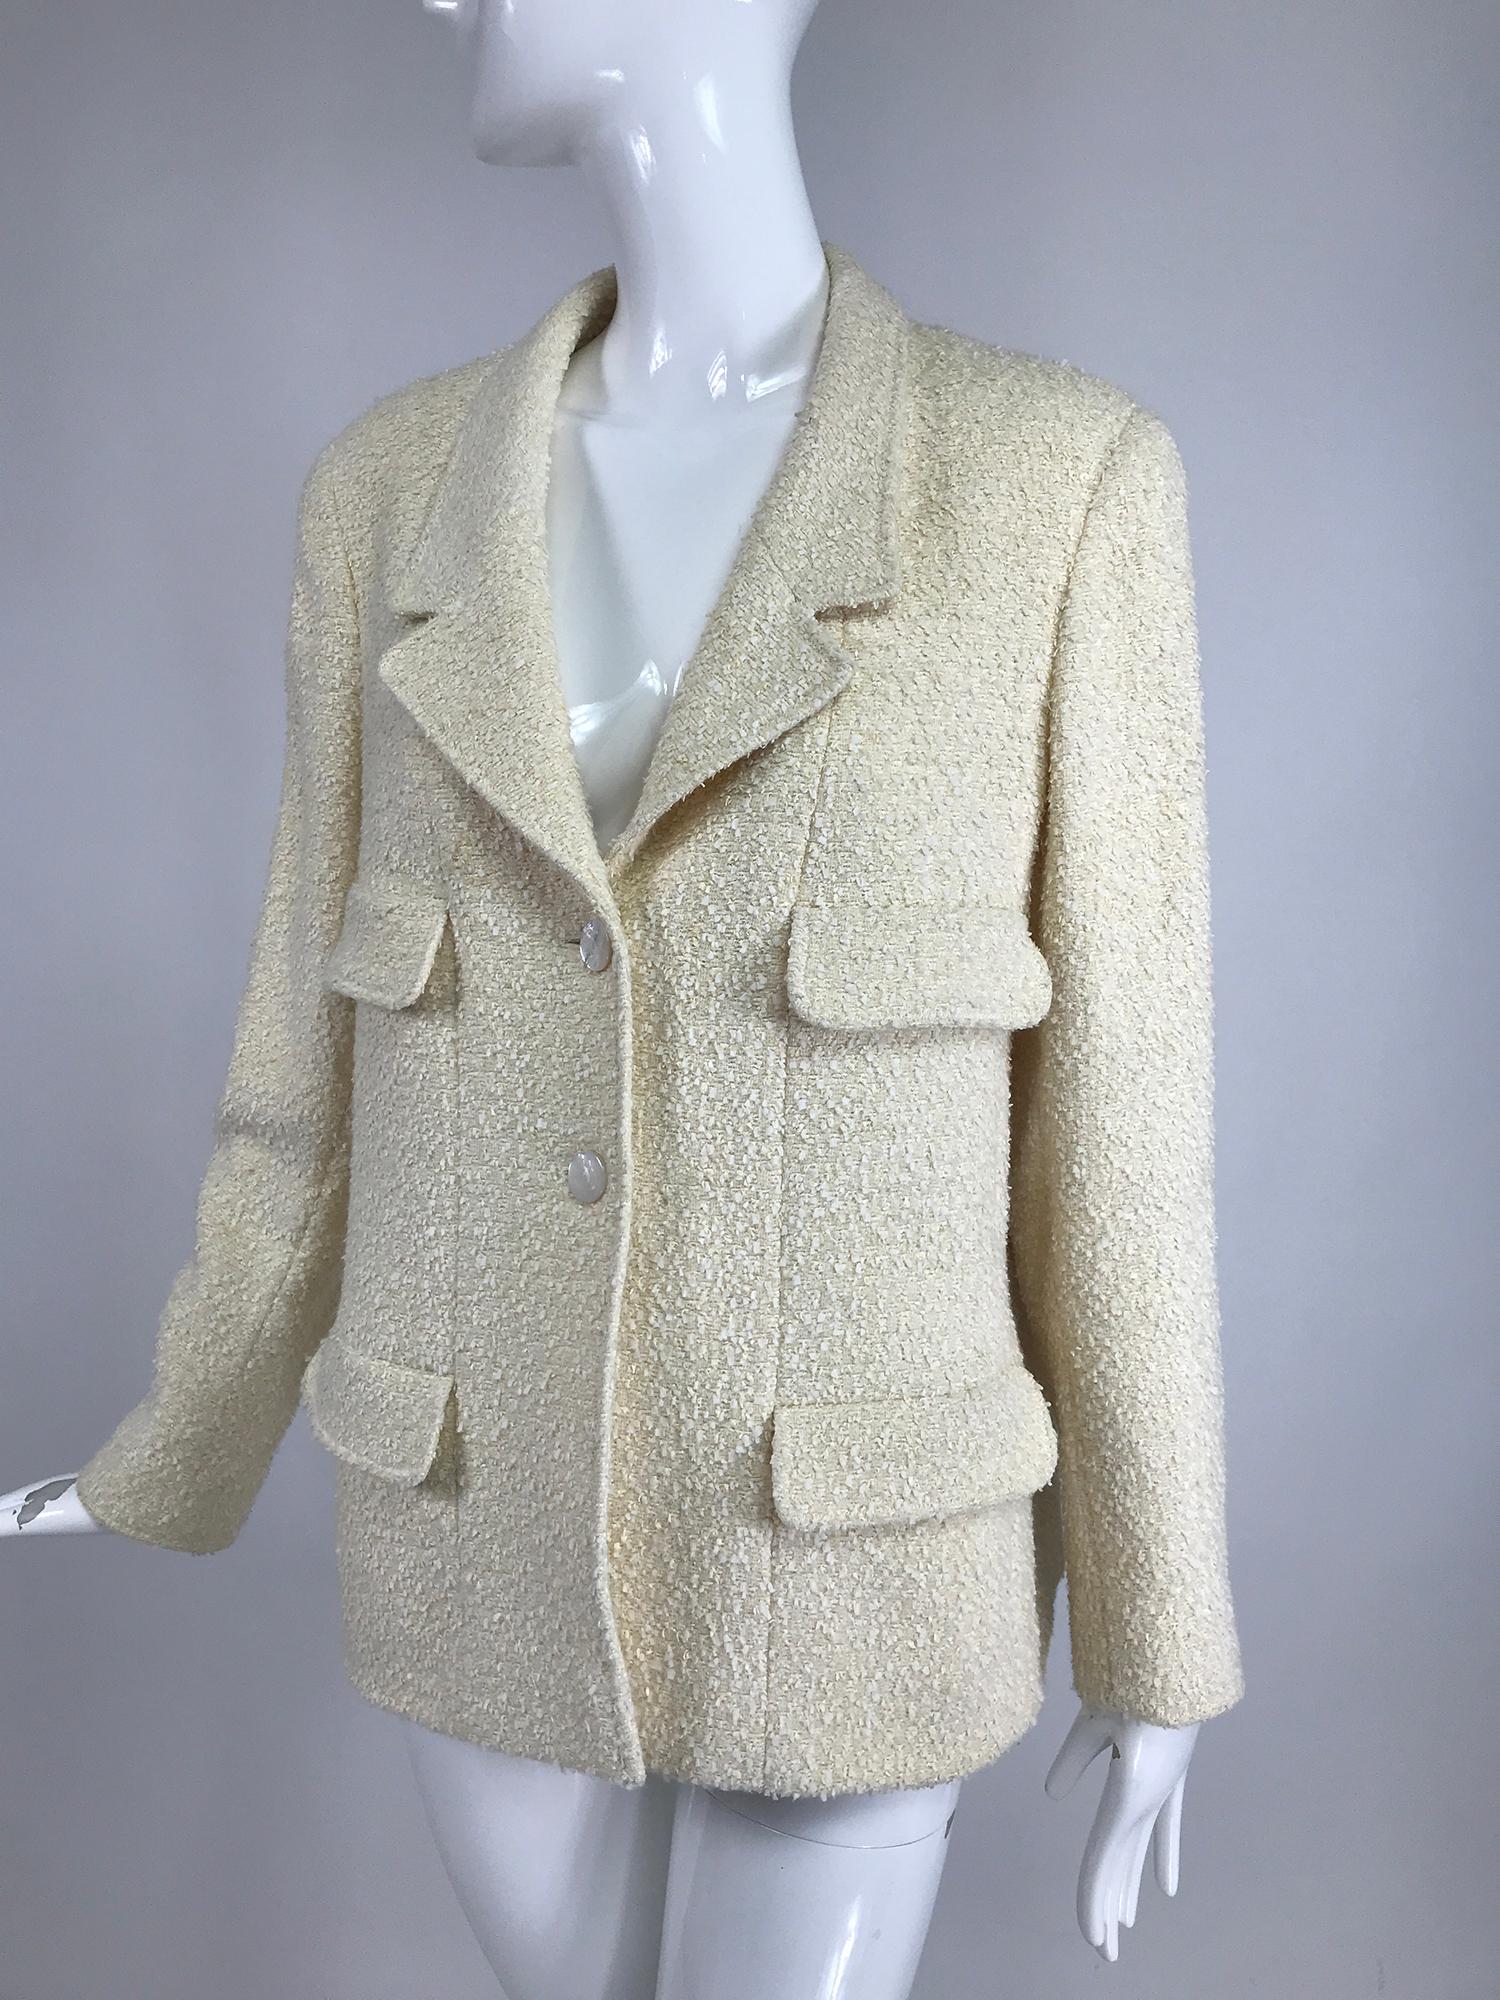 Chanel Cream boulce 4 pocket jacket 1998C with mother of pearl logo buttons. Hip length jacket with 4 flap pockets, 2 working. Low V neckline with notched lapel collar. Long sleeves have single button cuffs. Lined in white silk. Marked size 42. 
   